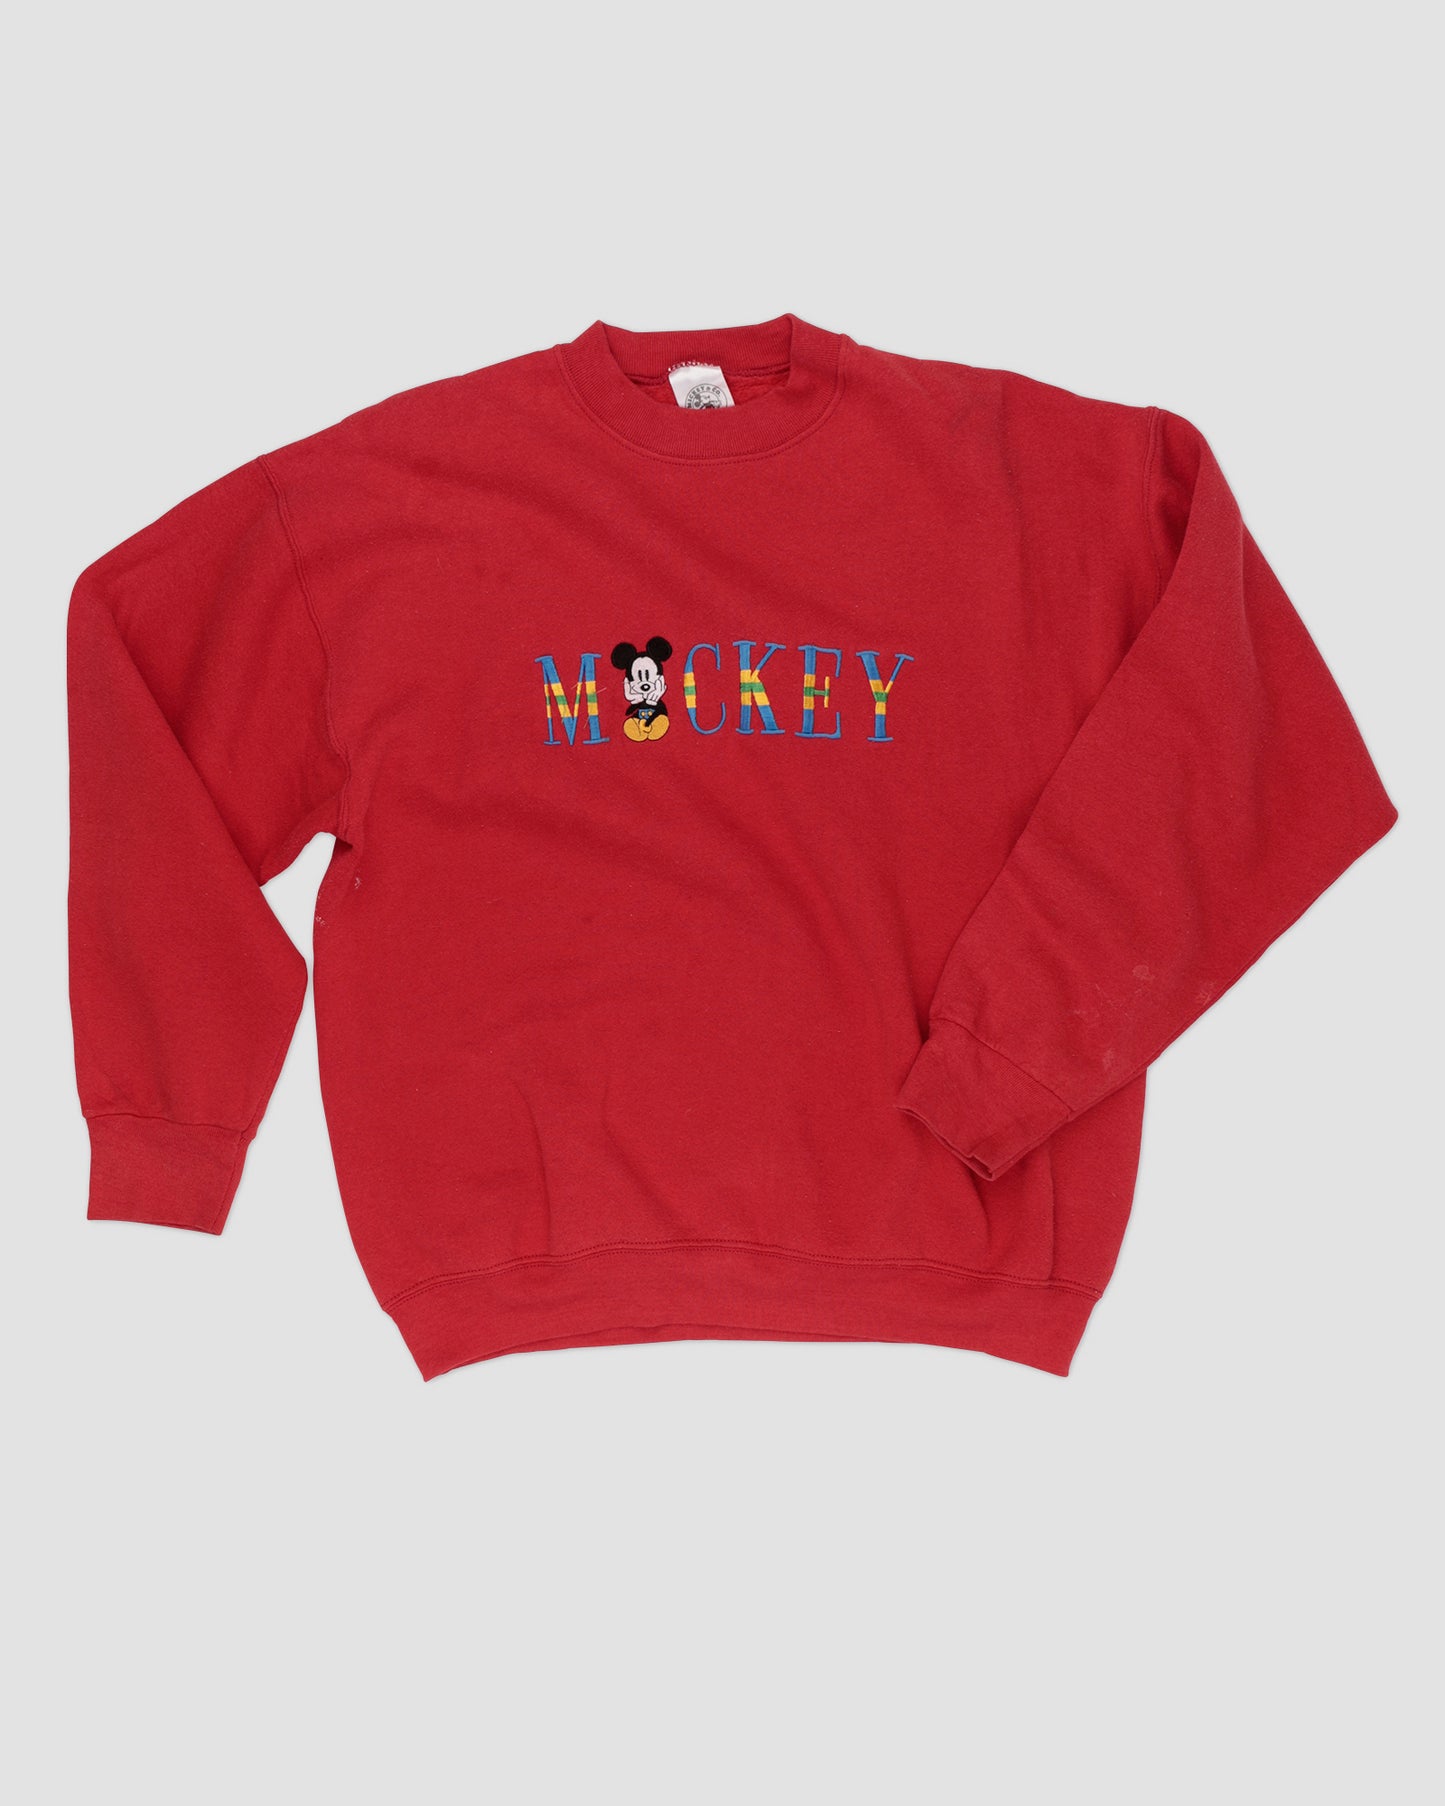 SWEATSHIRT  - Vintage Mickey & Co Embroidered Red XL